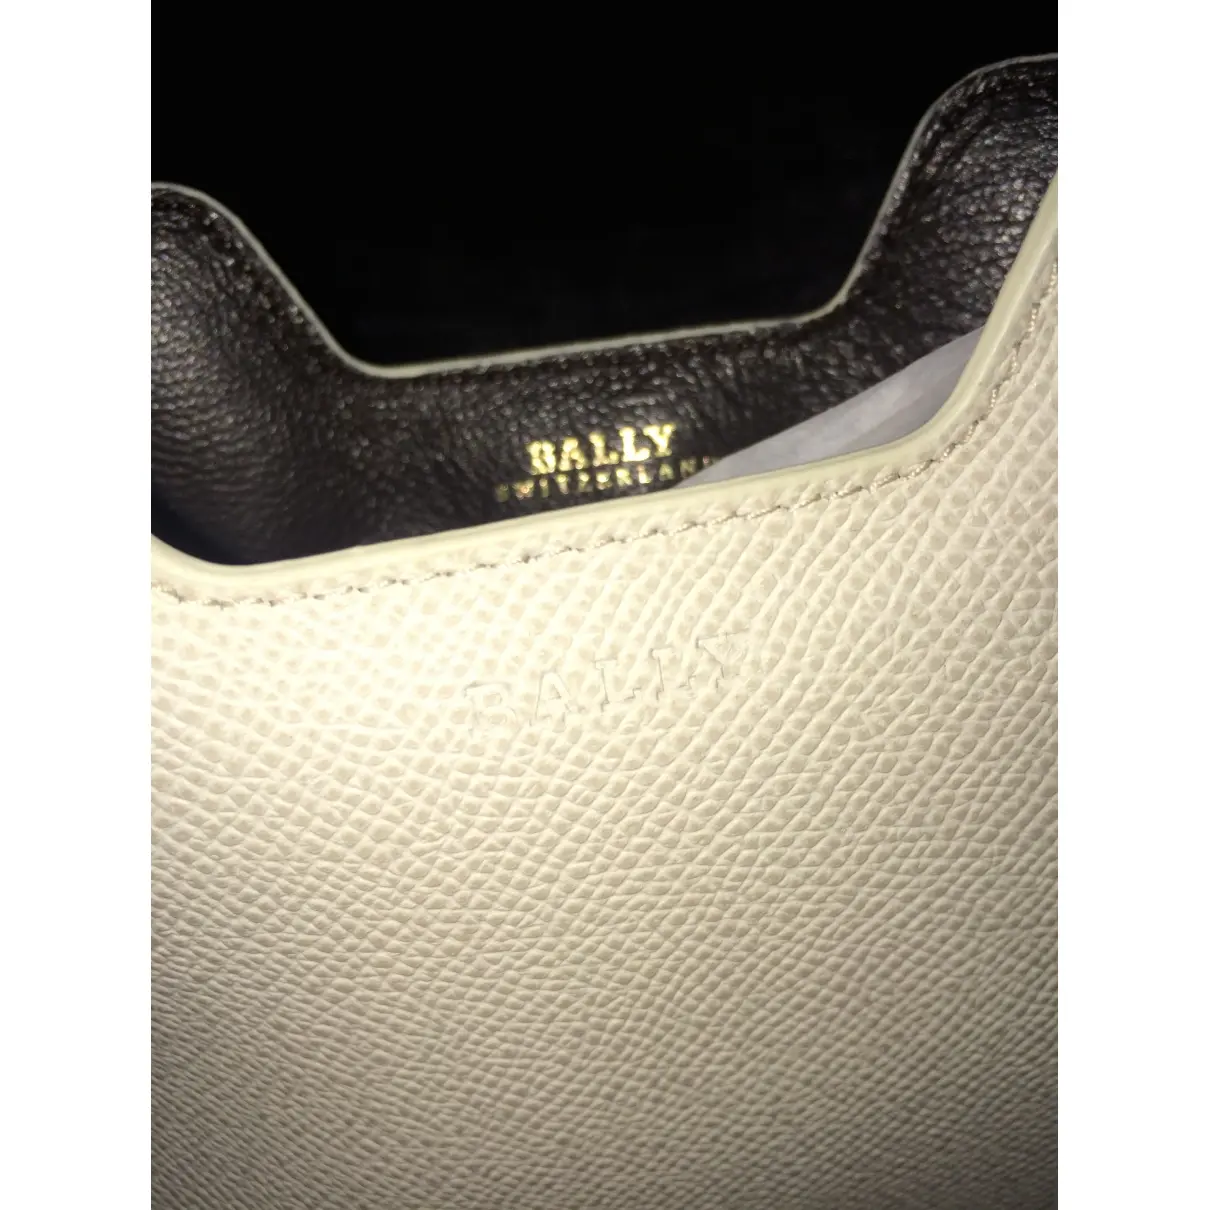 Buy Bally Beige Leather Accessorie online